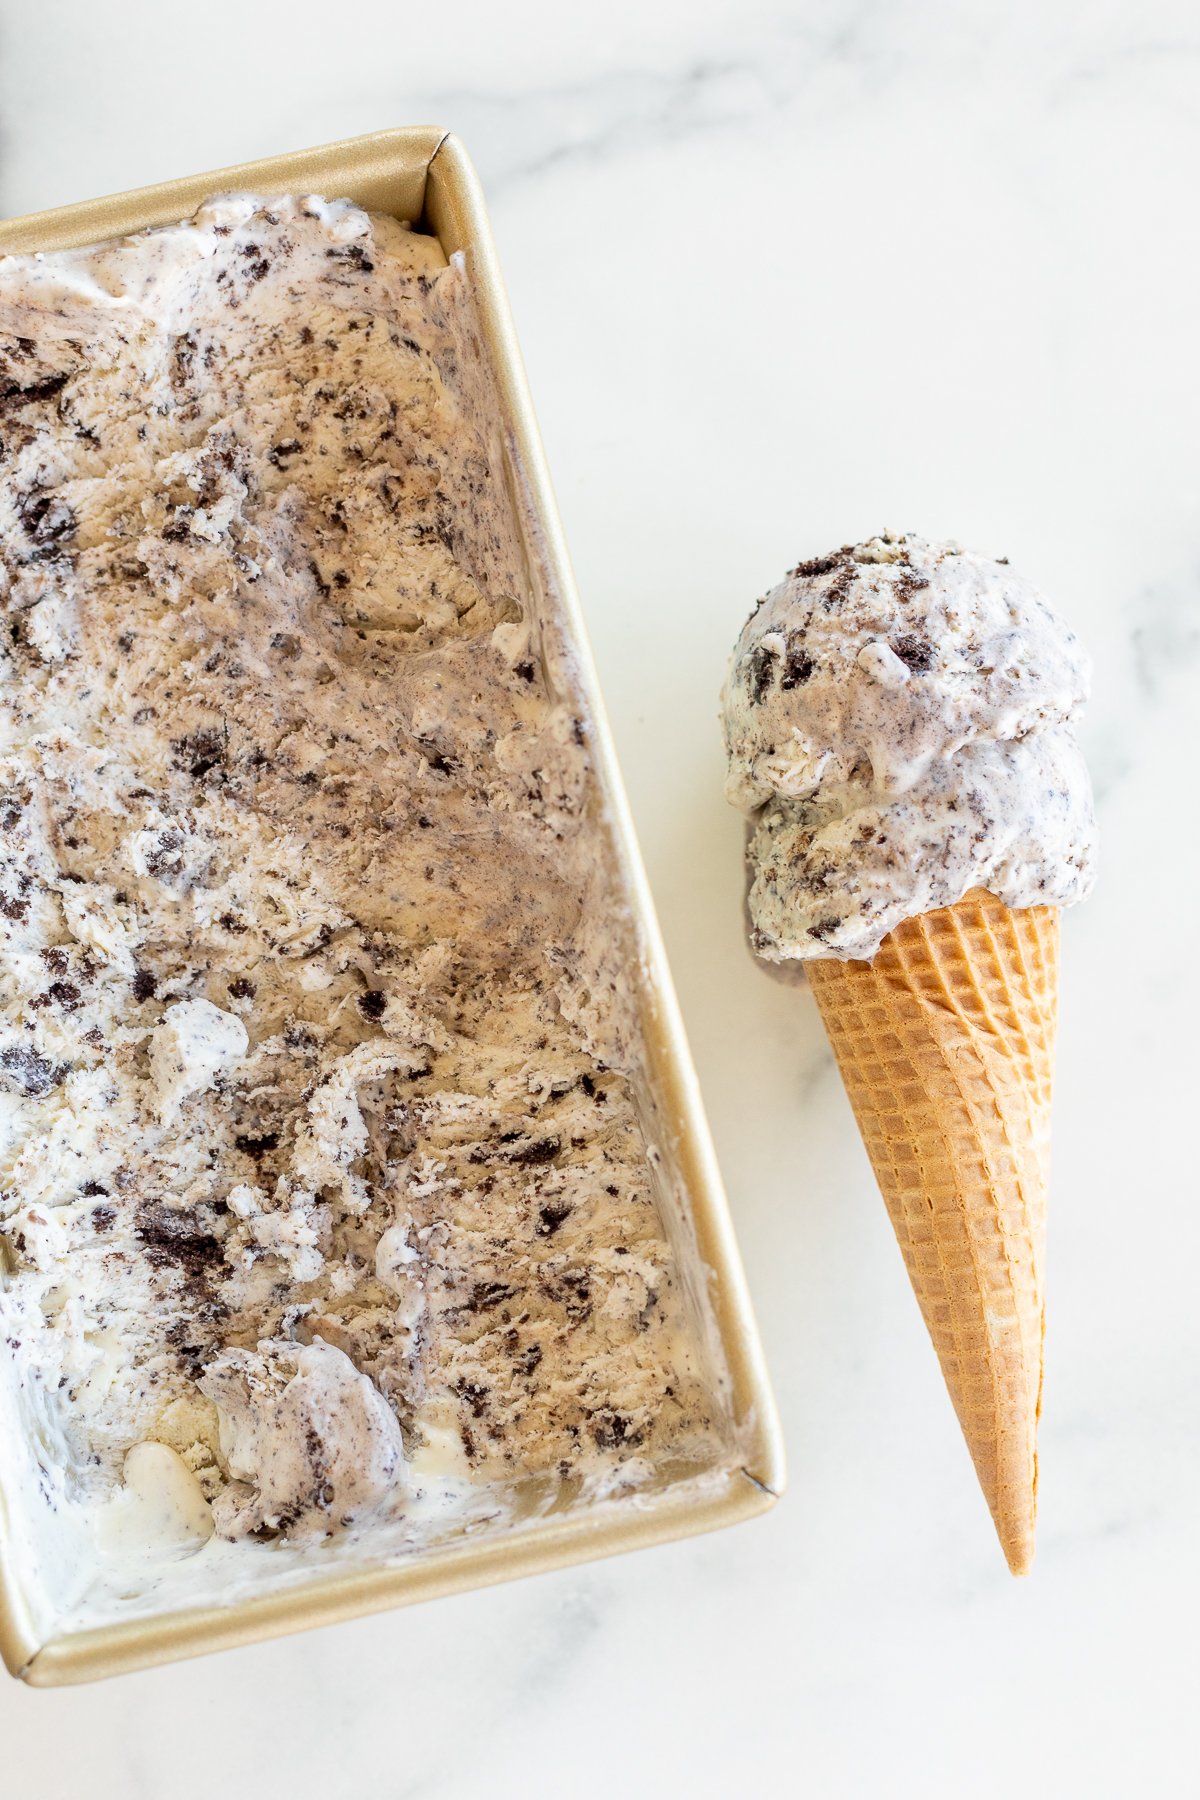 Overhead view of cookies and cream ice cream in loaf pan next to ice cream cone